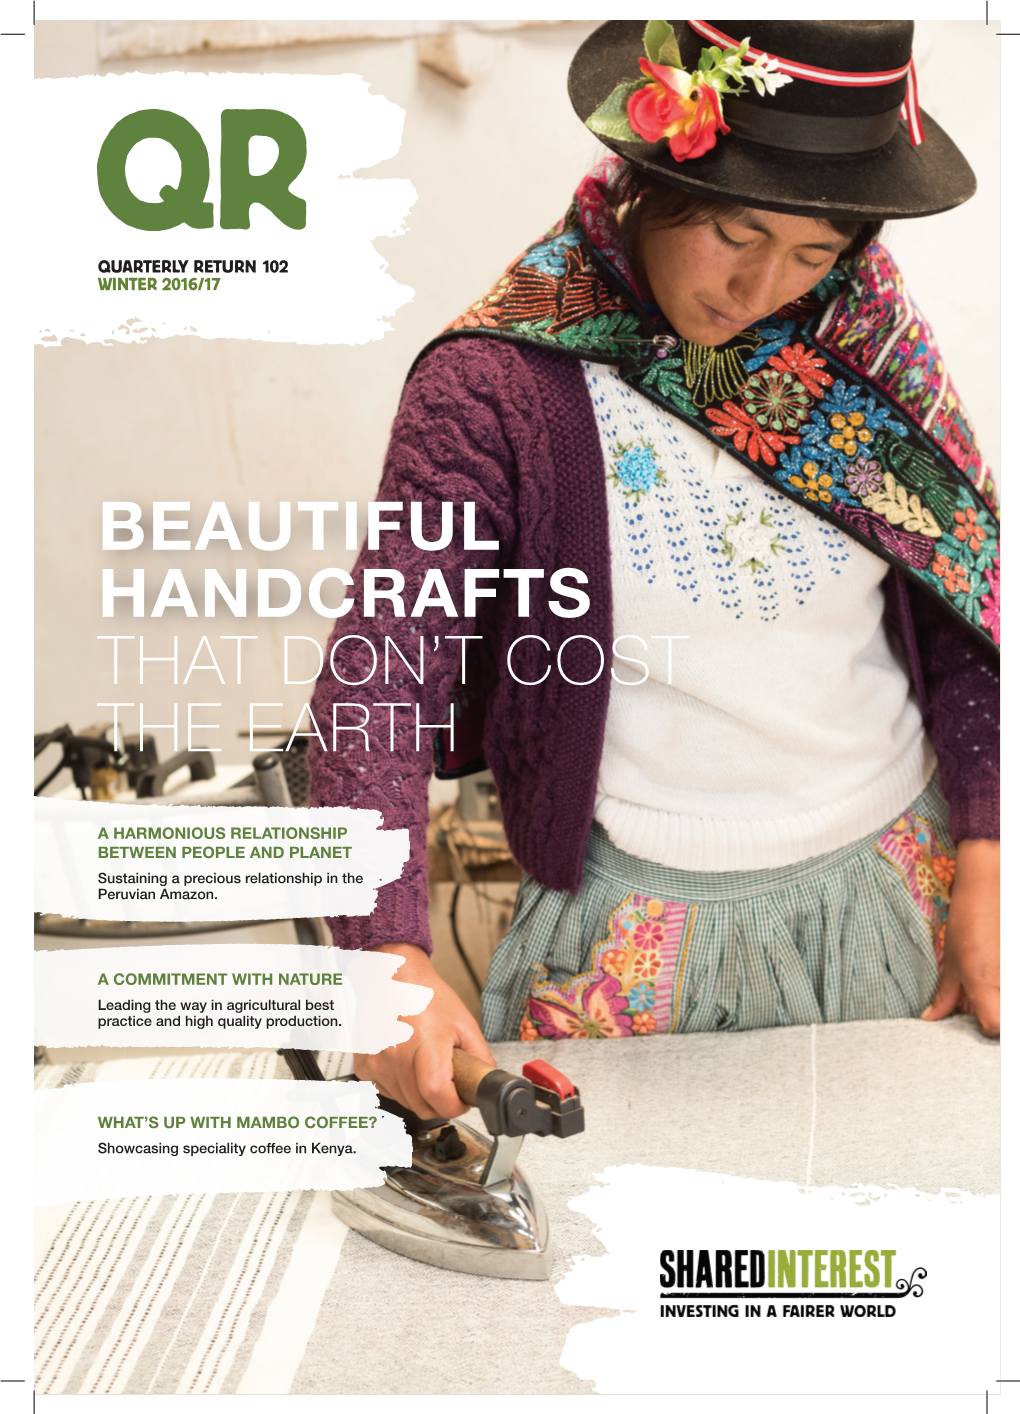 Beautiful Handcrafts That Don't Cost the Earth